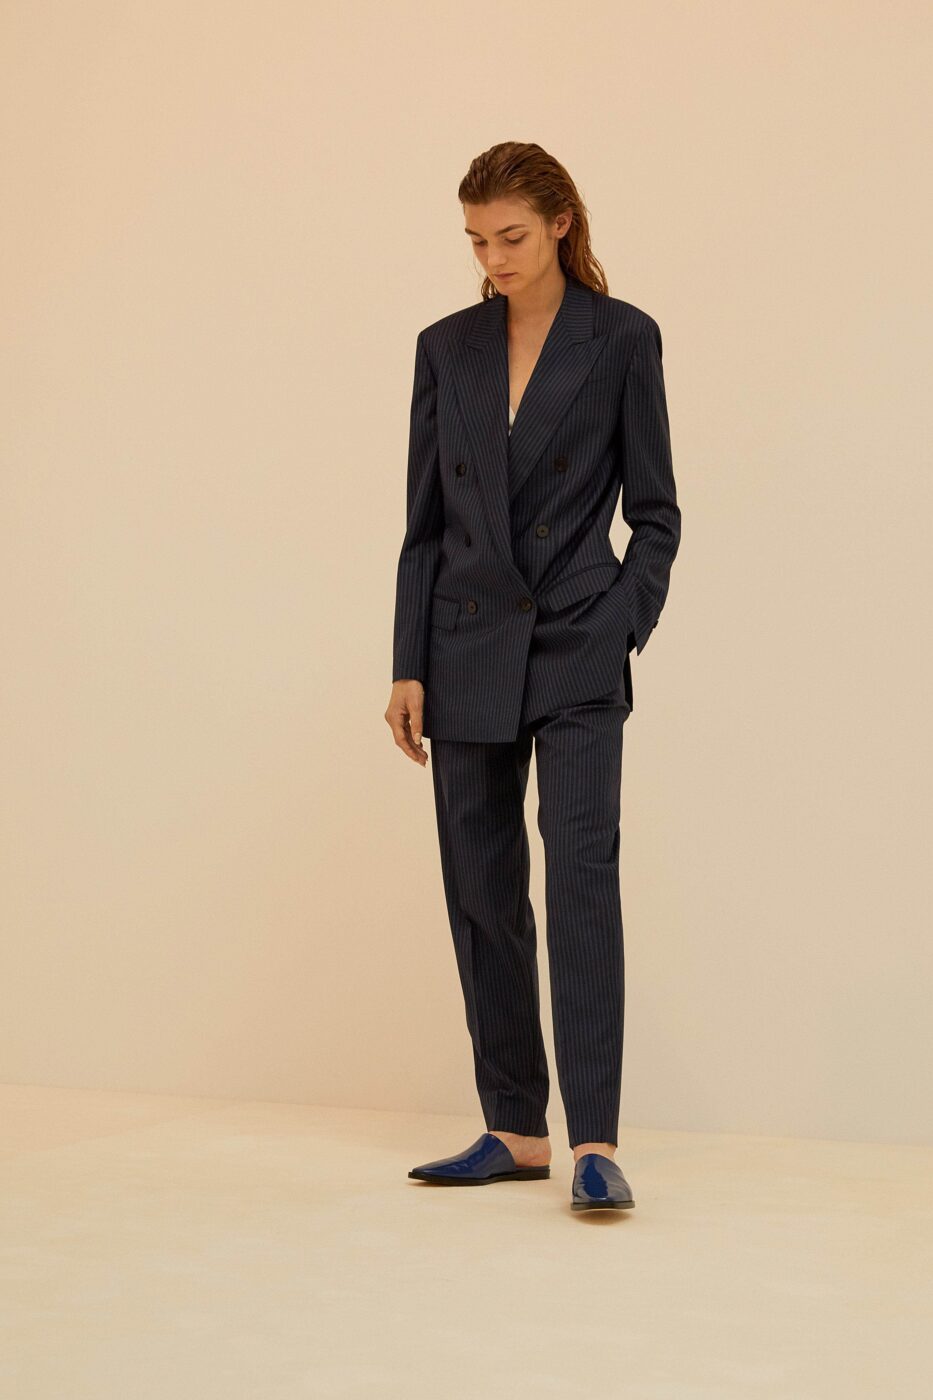 Theory Spring 2019 RTW Collection | LES FAÇONS